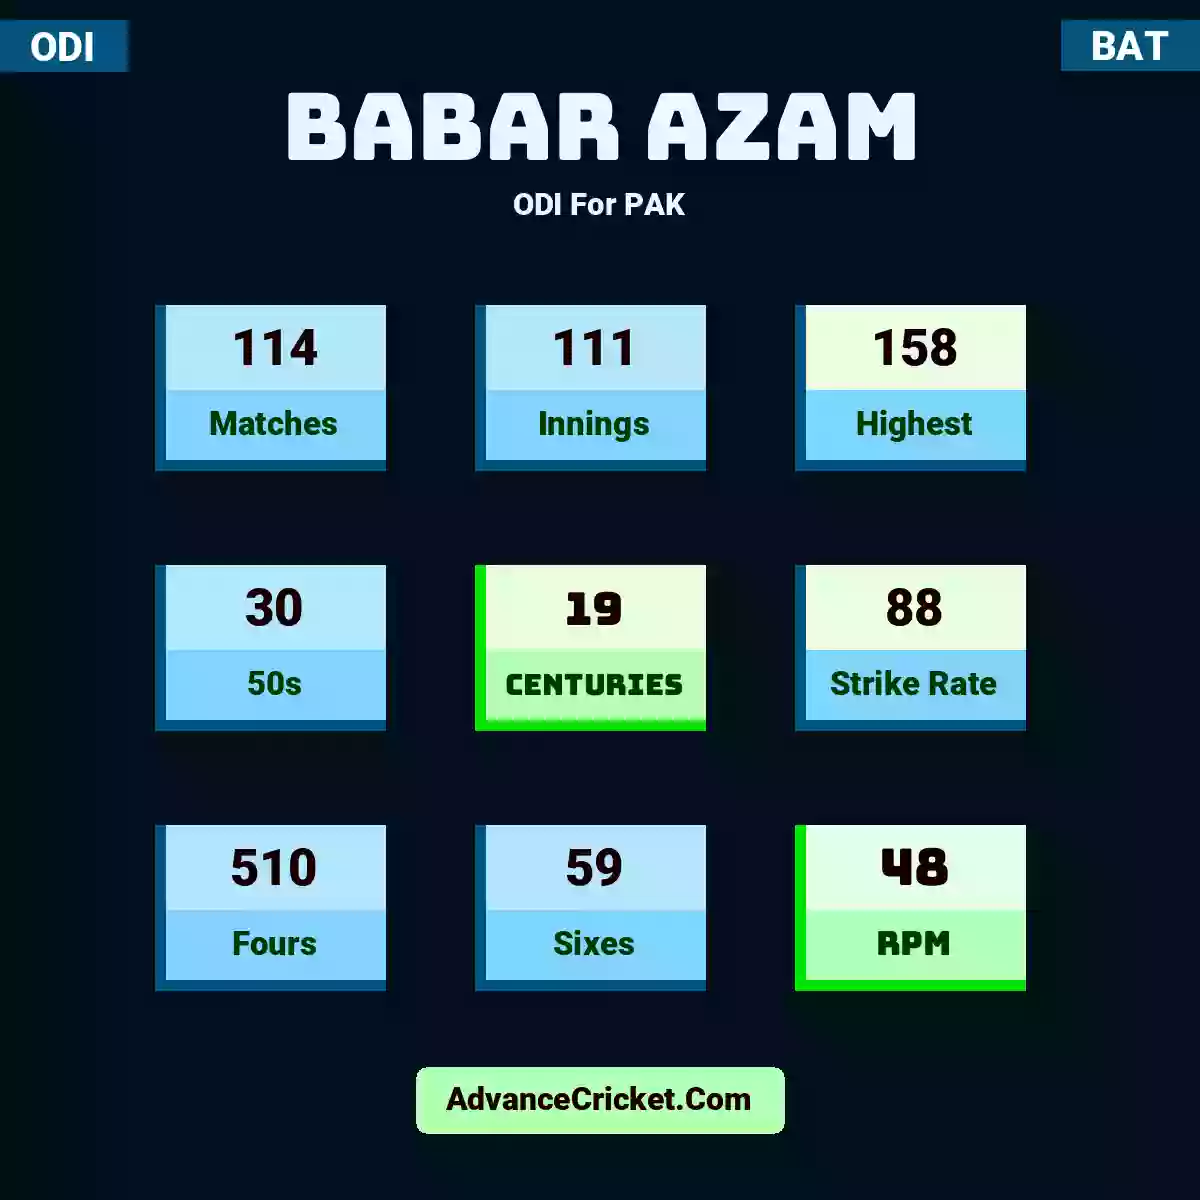 Babar Azam ODI  For PAK, Babar Azam played 114 matches, scored 158 runs as highest, 30 half-centuries, and 19 centuries, with a strike rate of 88. B.Azam hit 510 fours and 59 sixes, with an RPM of 48.